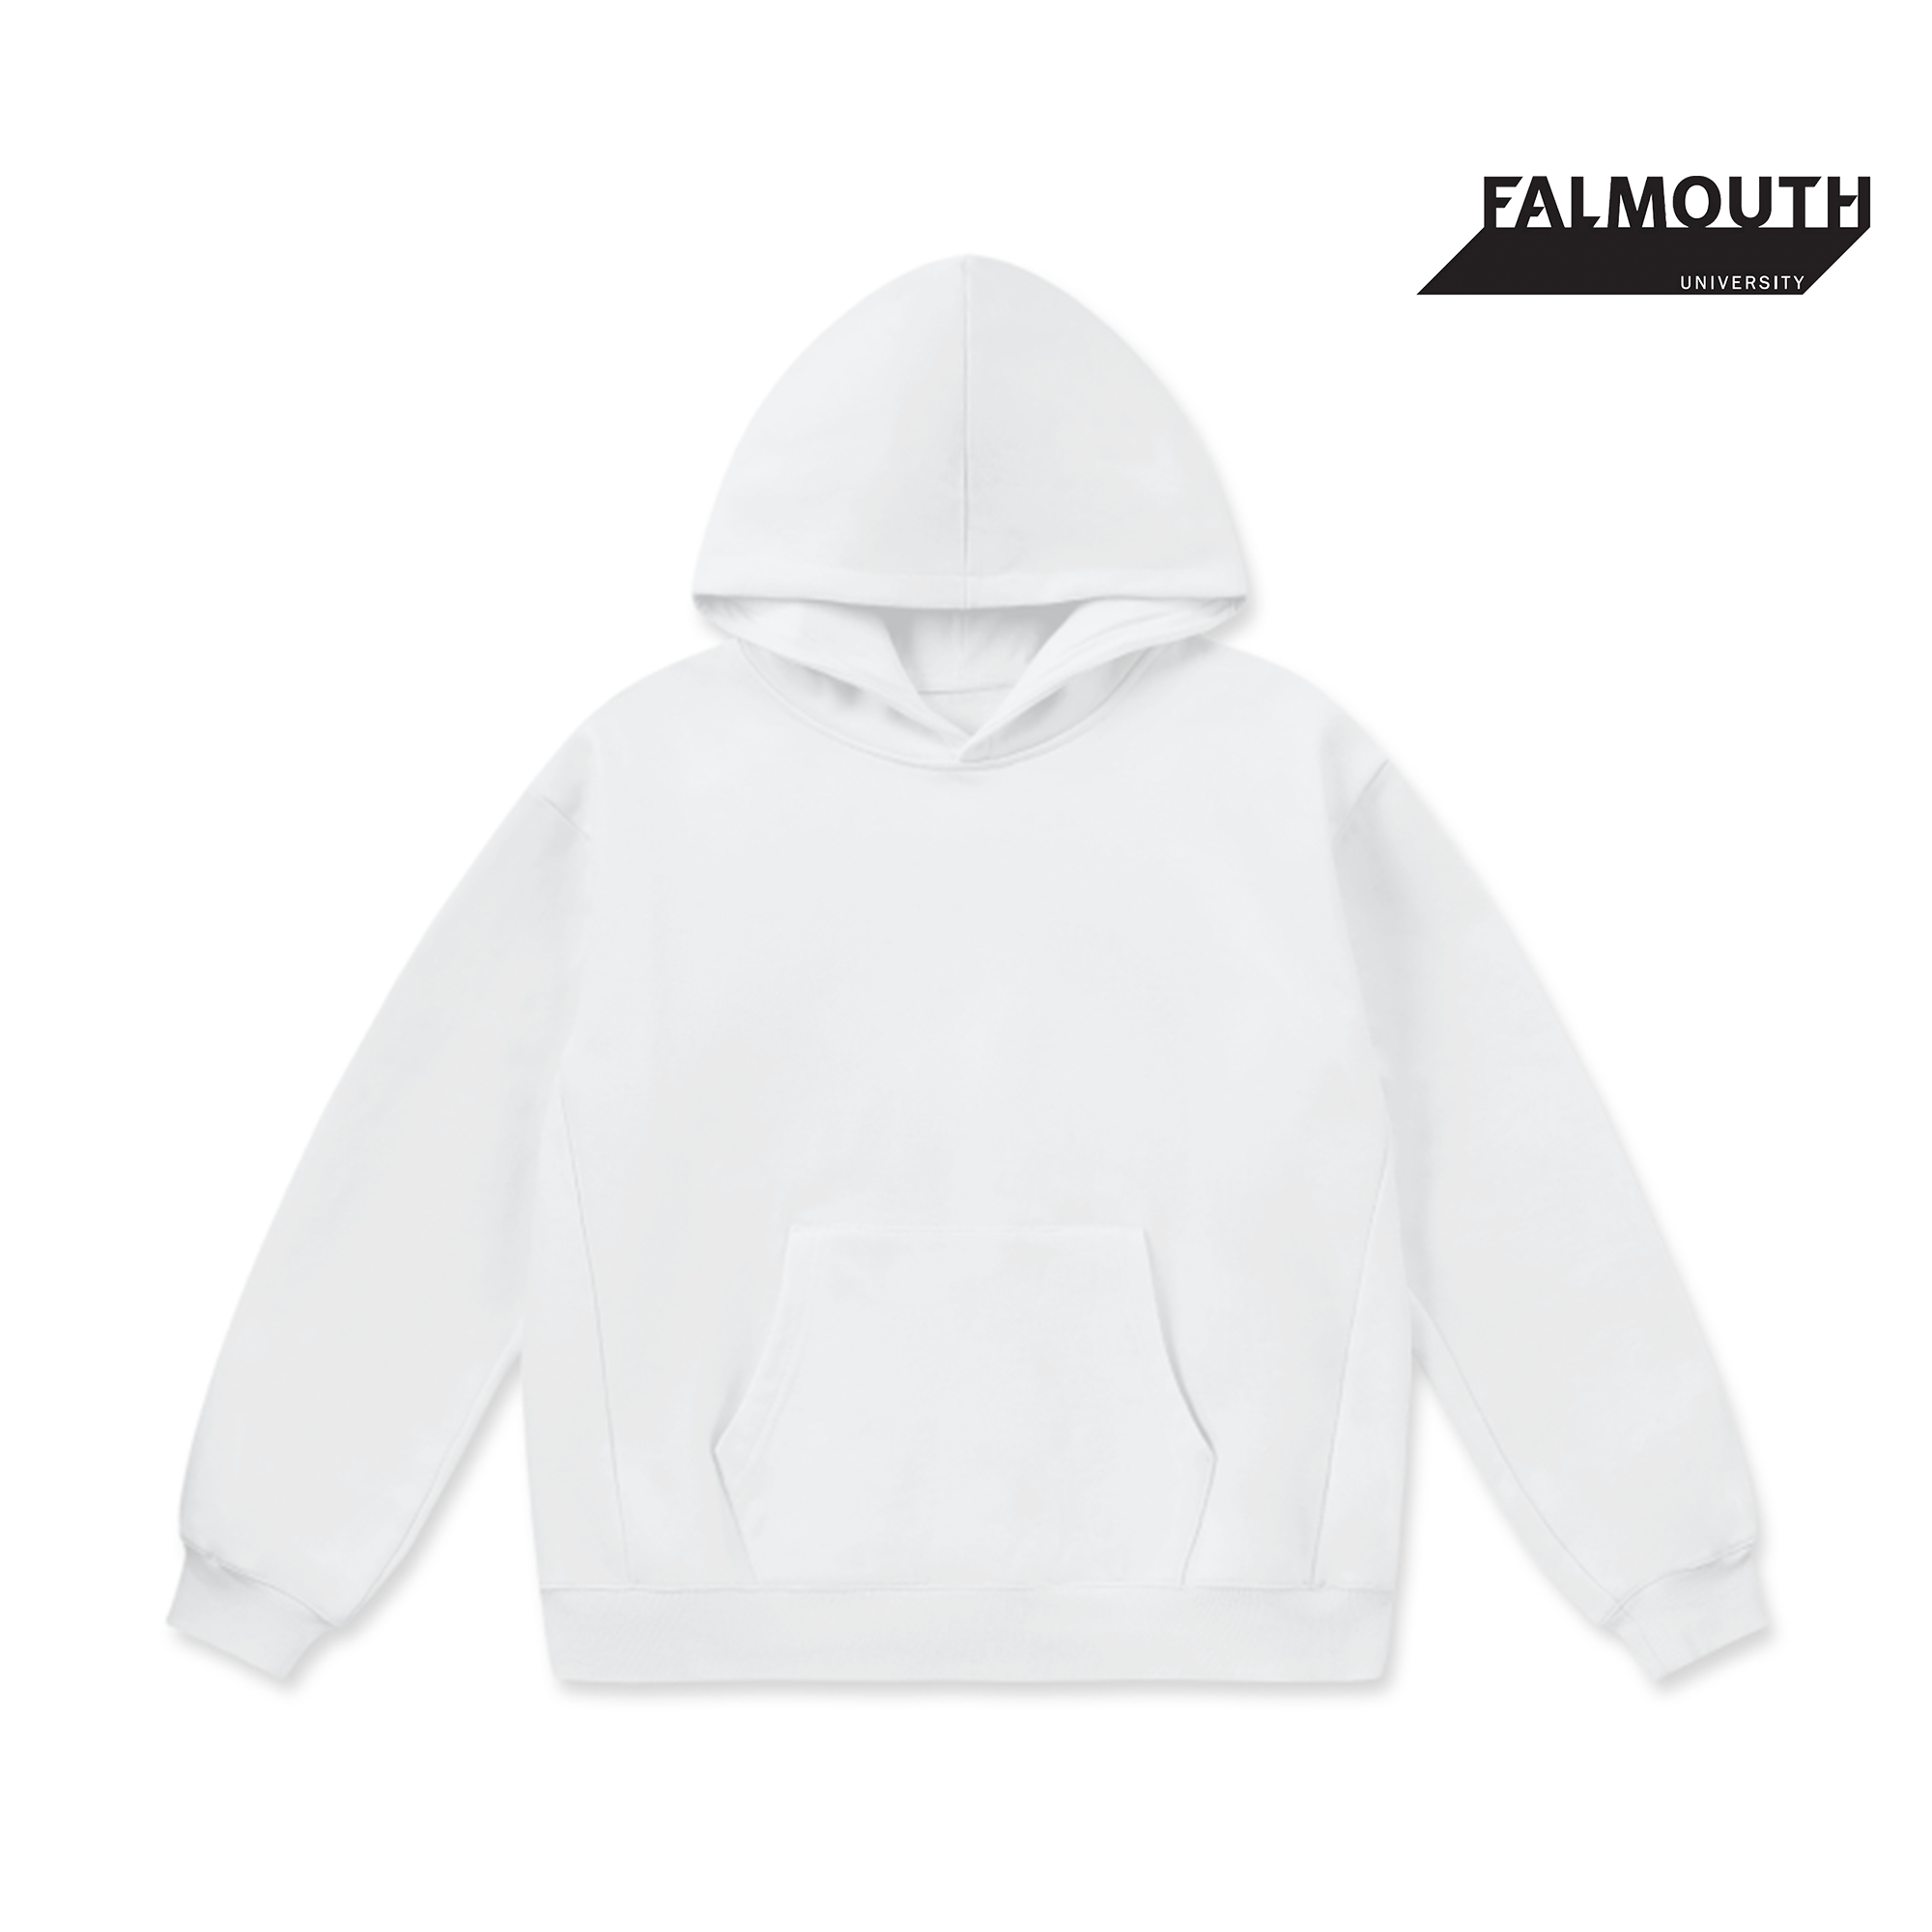 LCC Super Weighted Hoodie - Falmouth University (Modern)